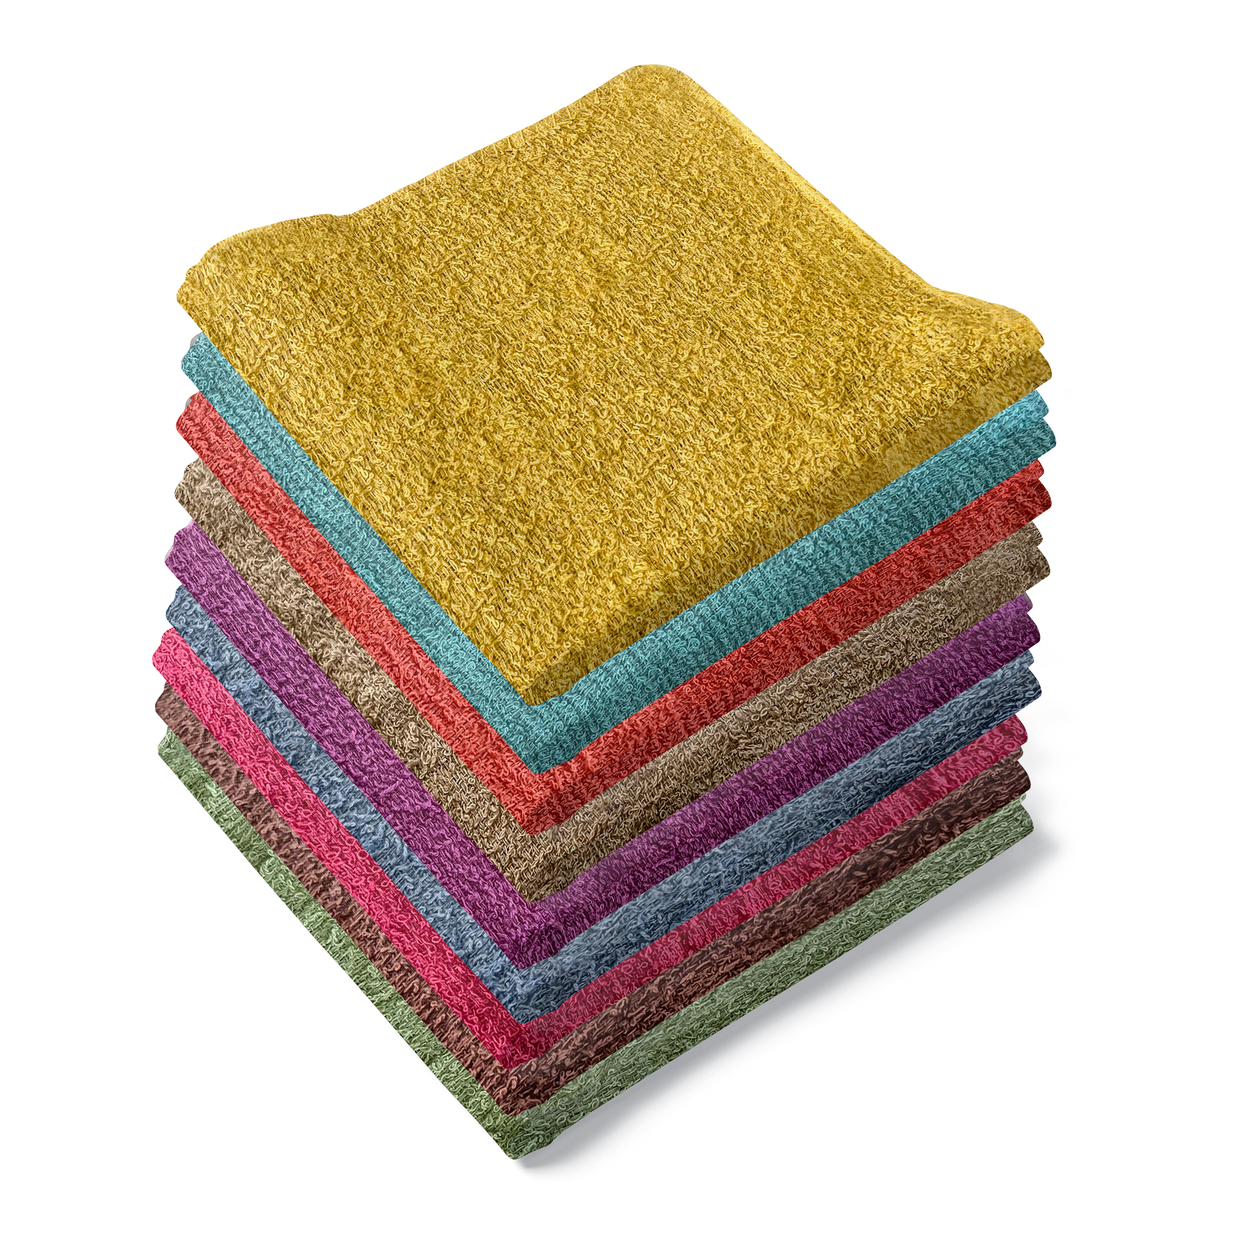 Multi-Pack: 100% Ultra-Soft Absorbent Cotton Multipurpose Cleaning Wash Cloths - 12-pack